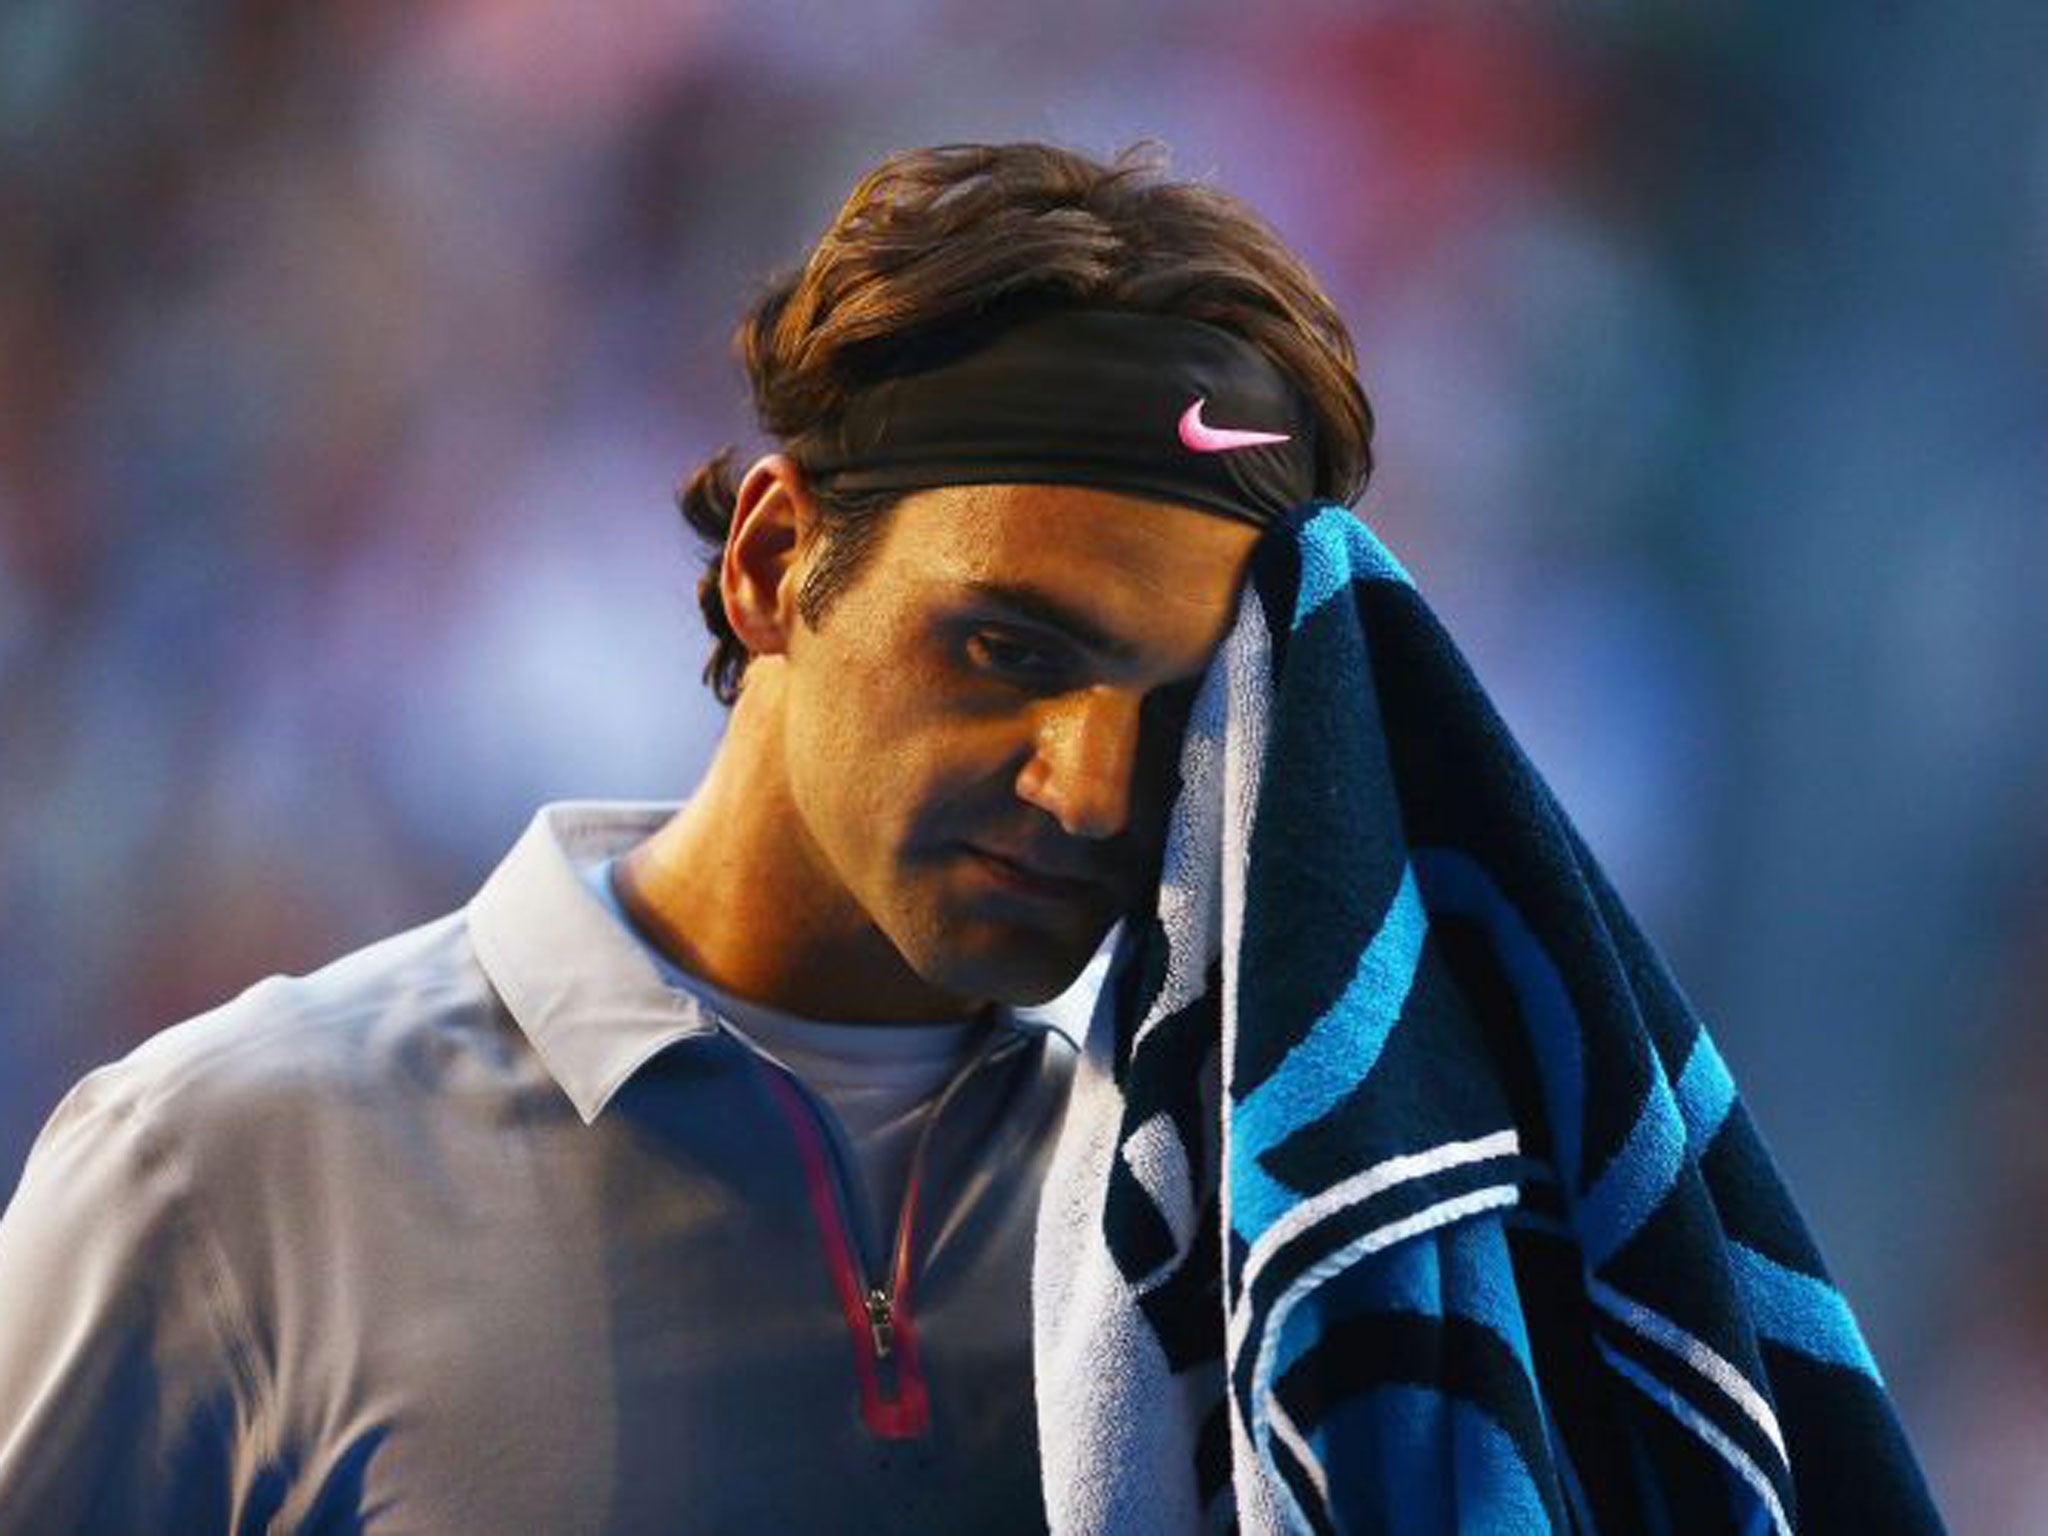 Roger Federer was outserved and saw Murray hit more winners